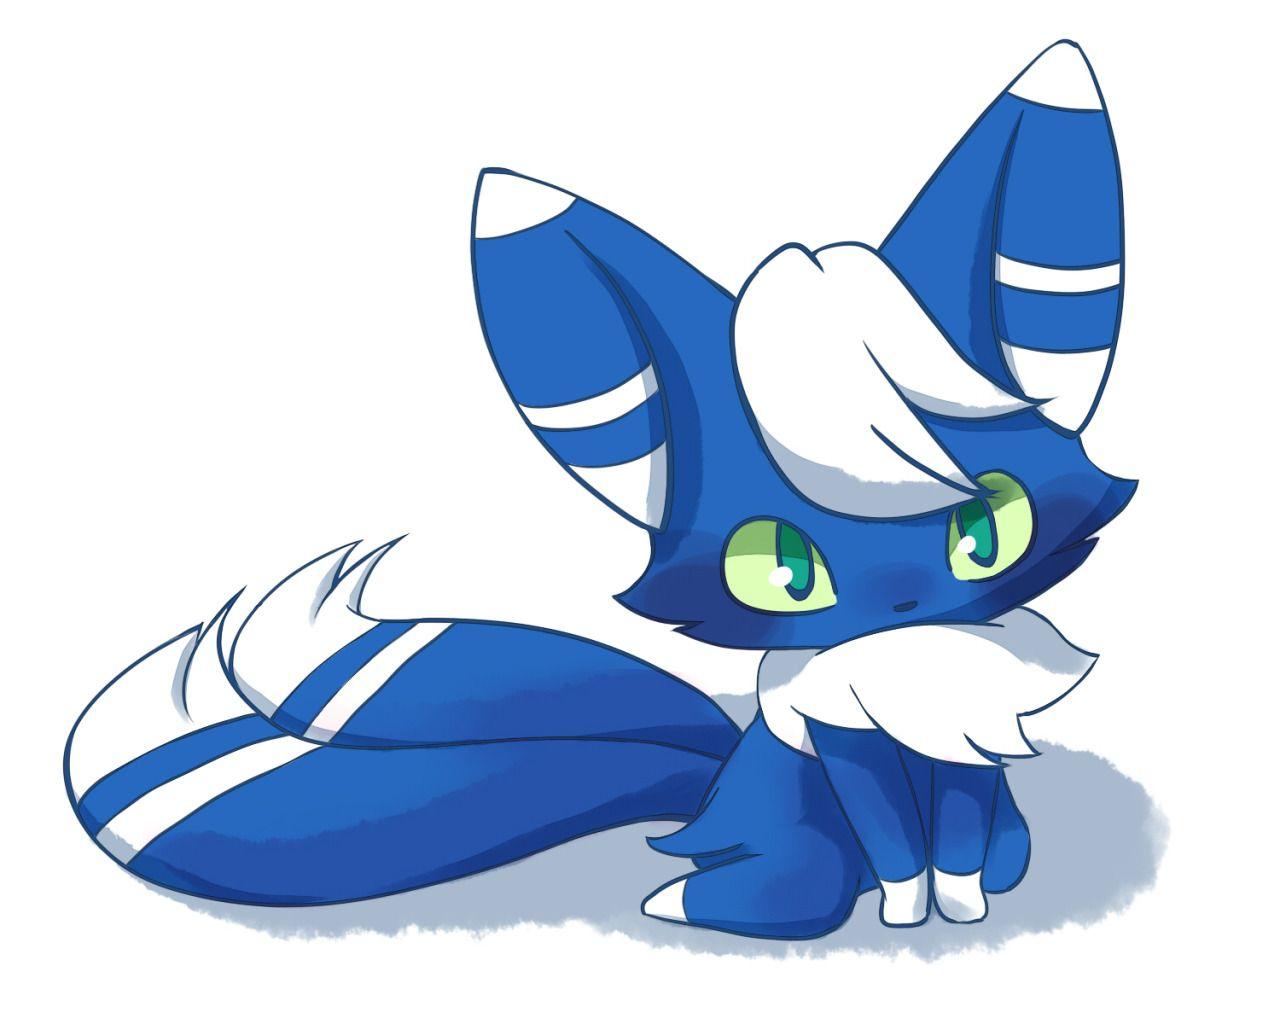 Japanese Meowstic